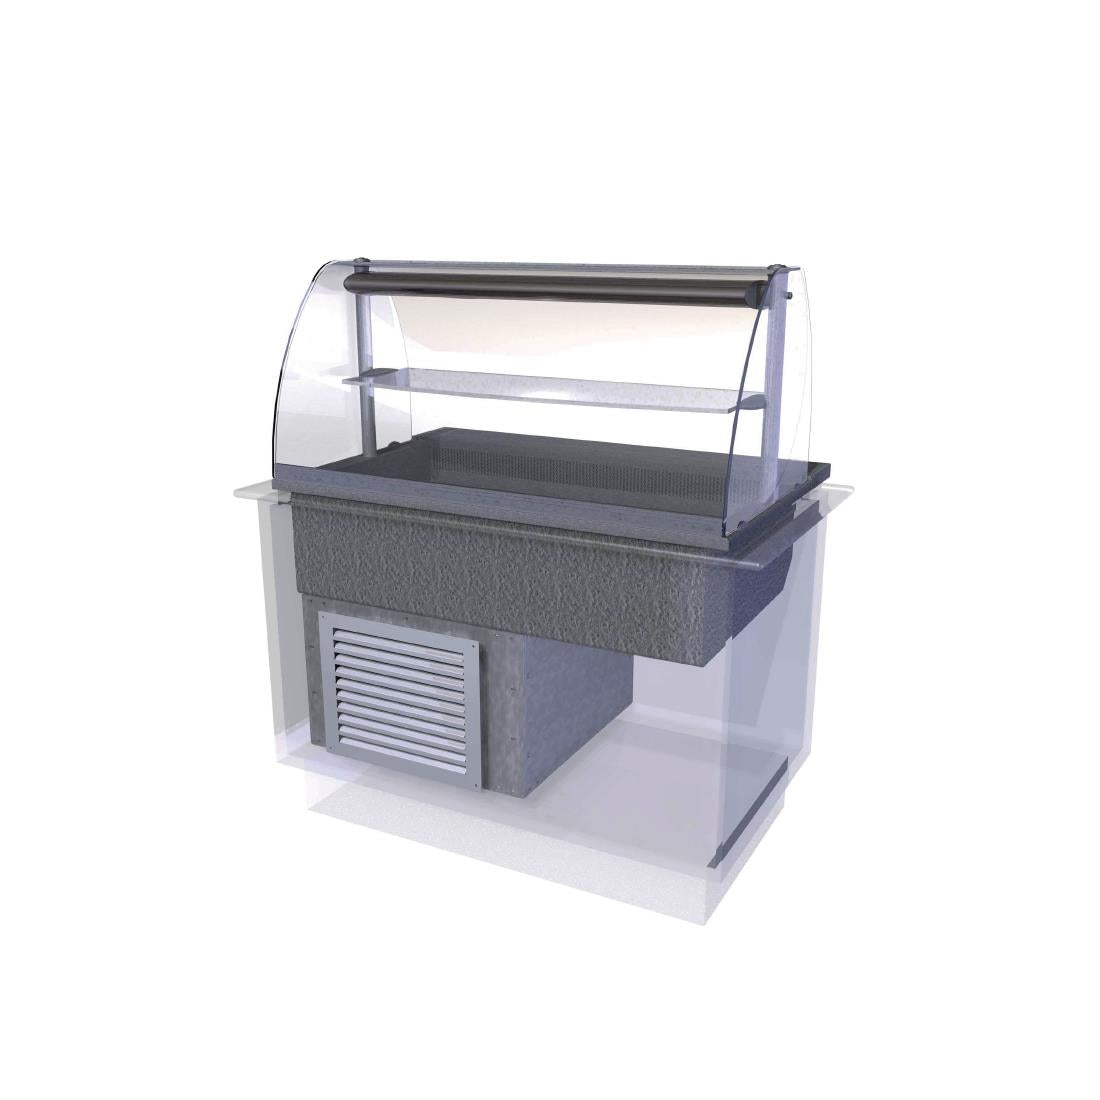 CW606 Designline Drop In Chilled Deli Serve Over Counter 1525mm JD Catering Equipment Solutions Ltd